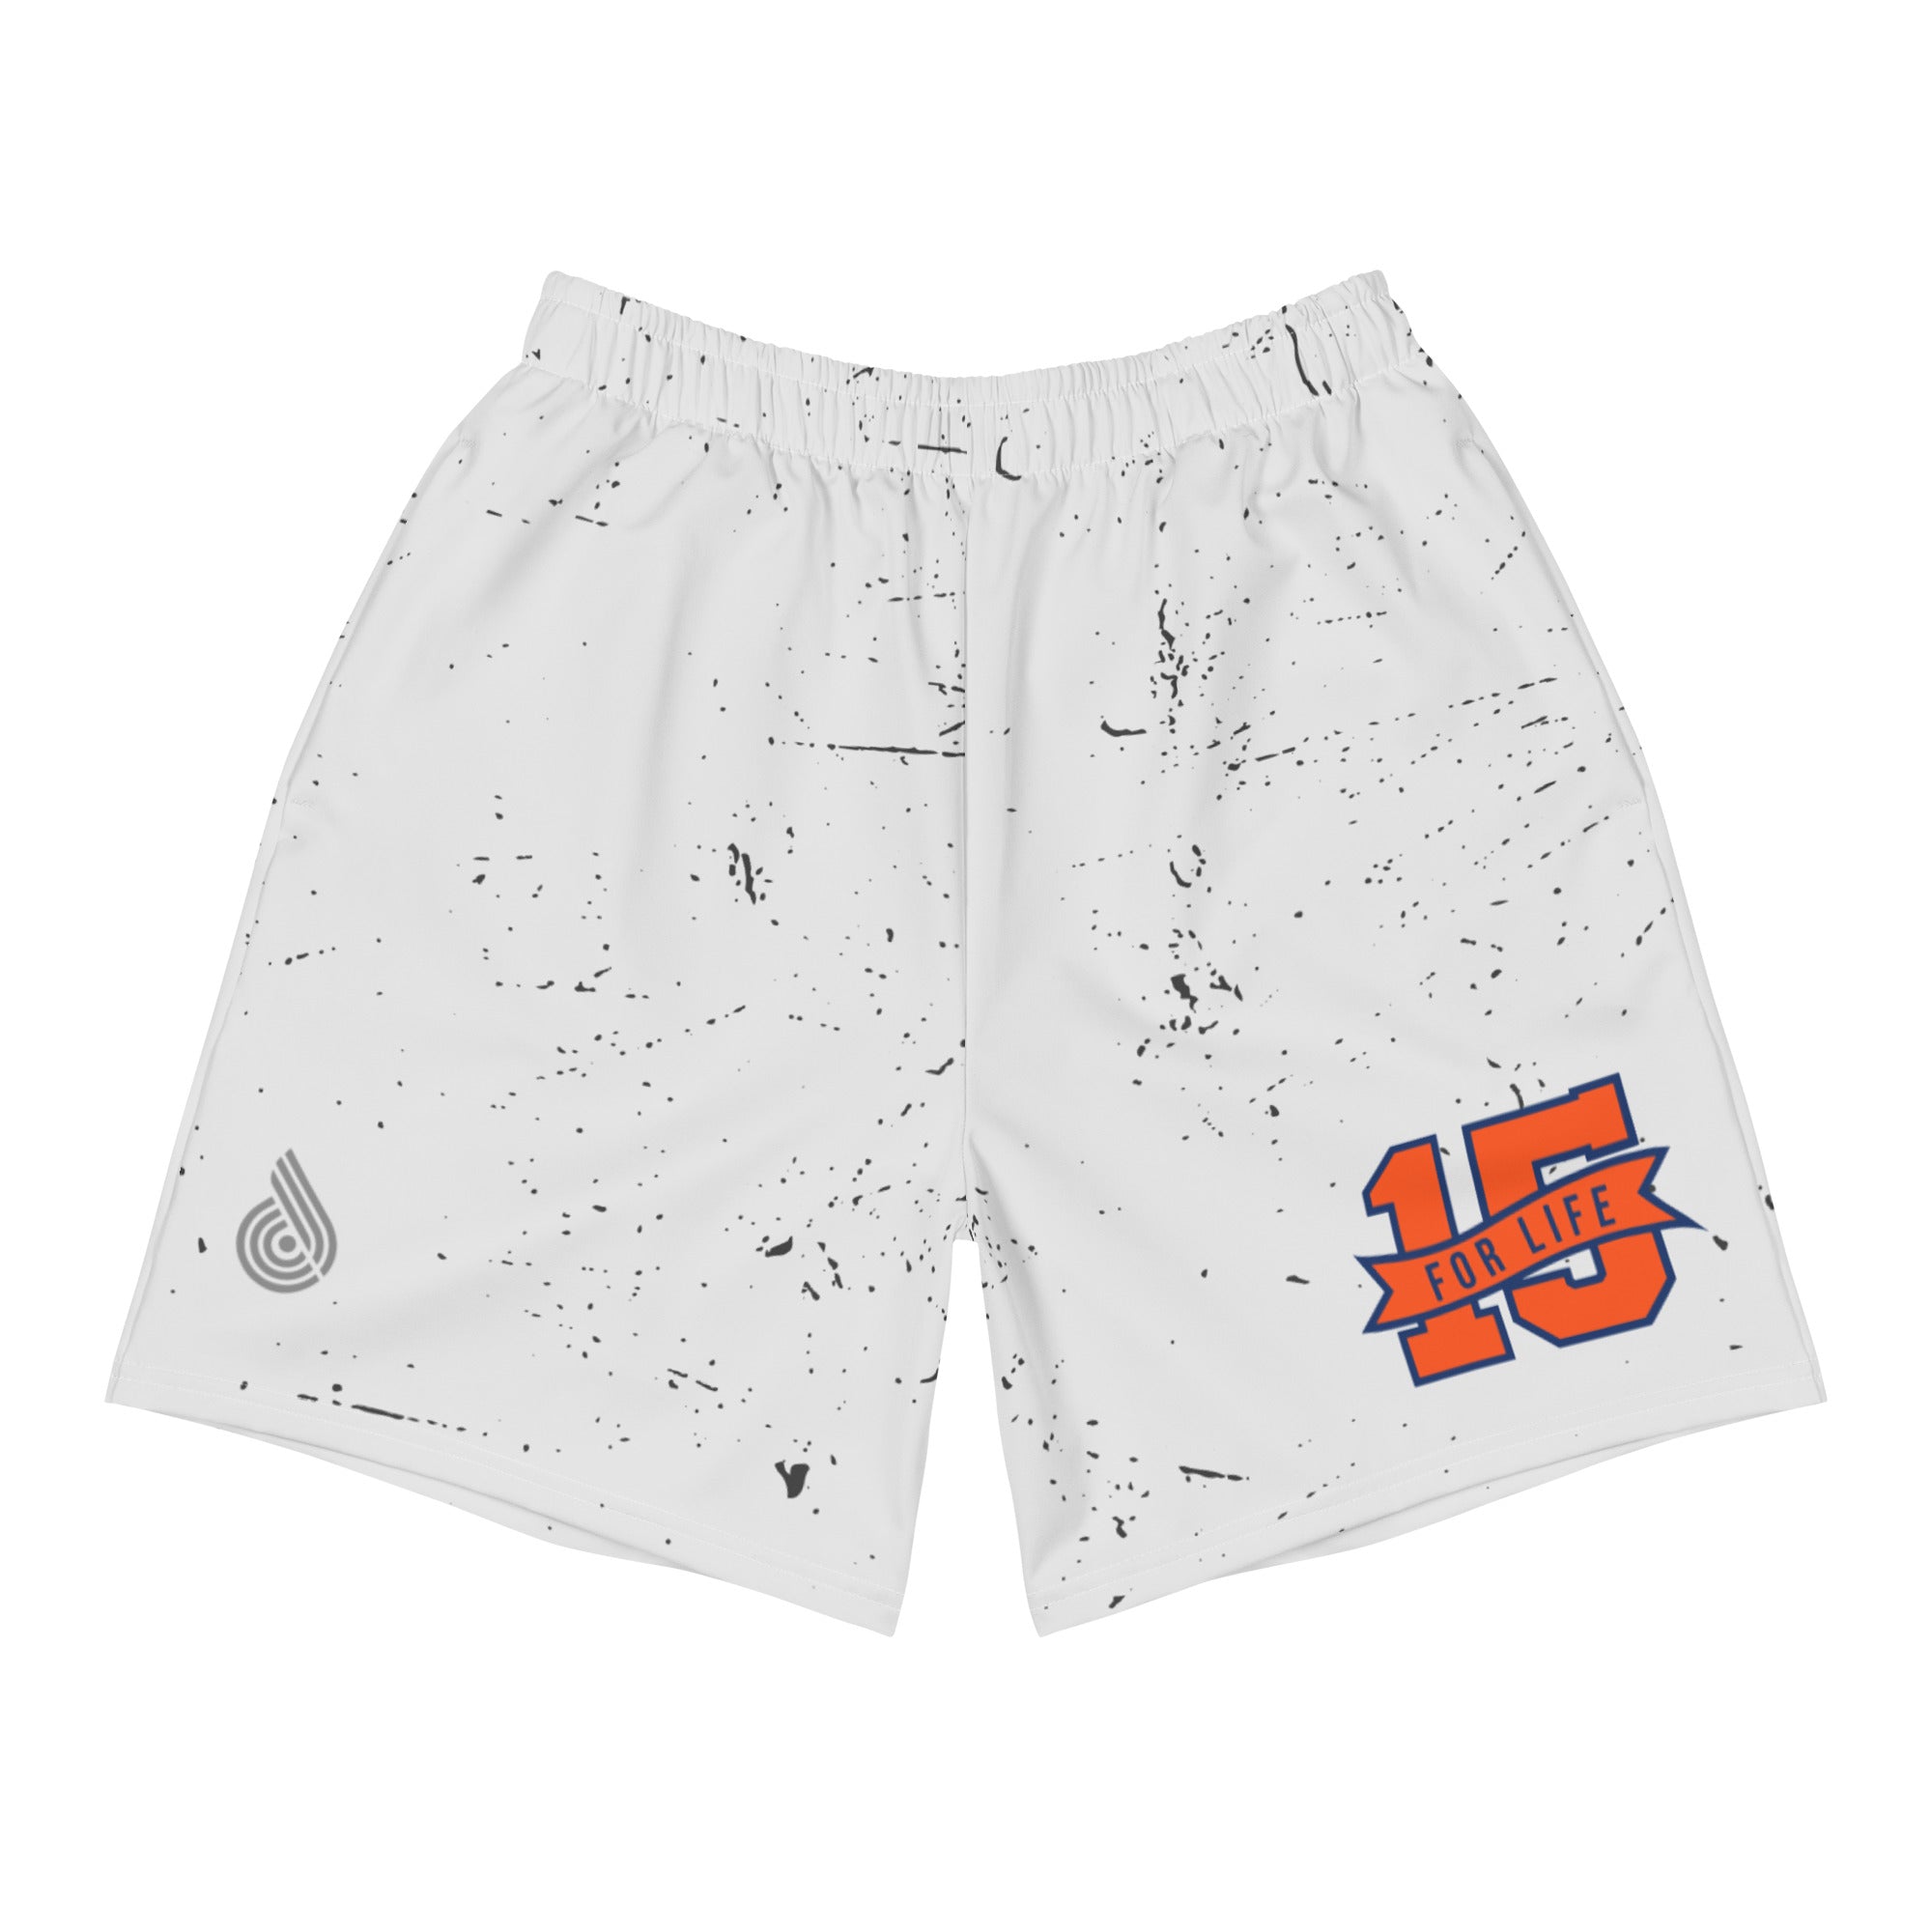 15 For Life Men's Athletic Shorts